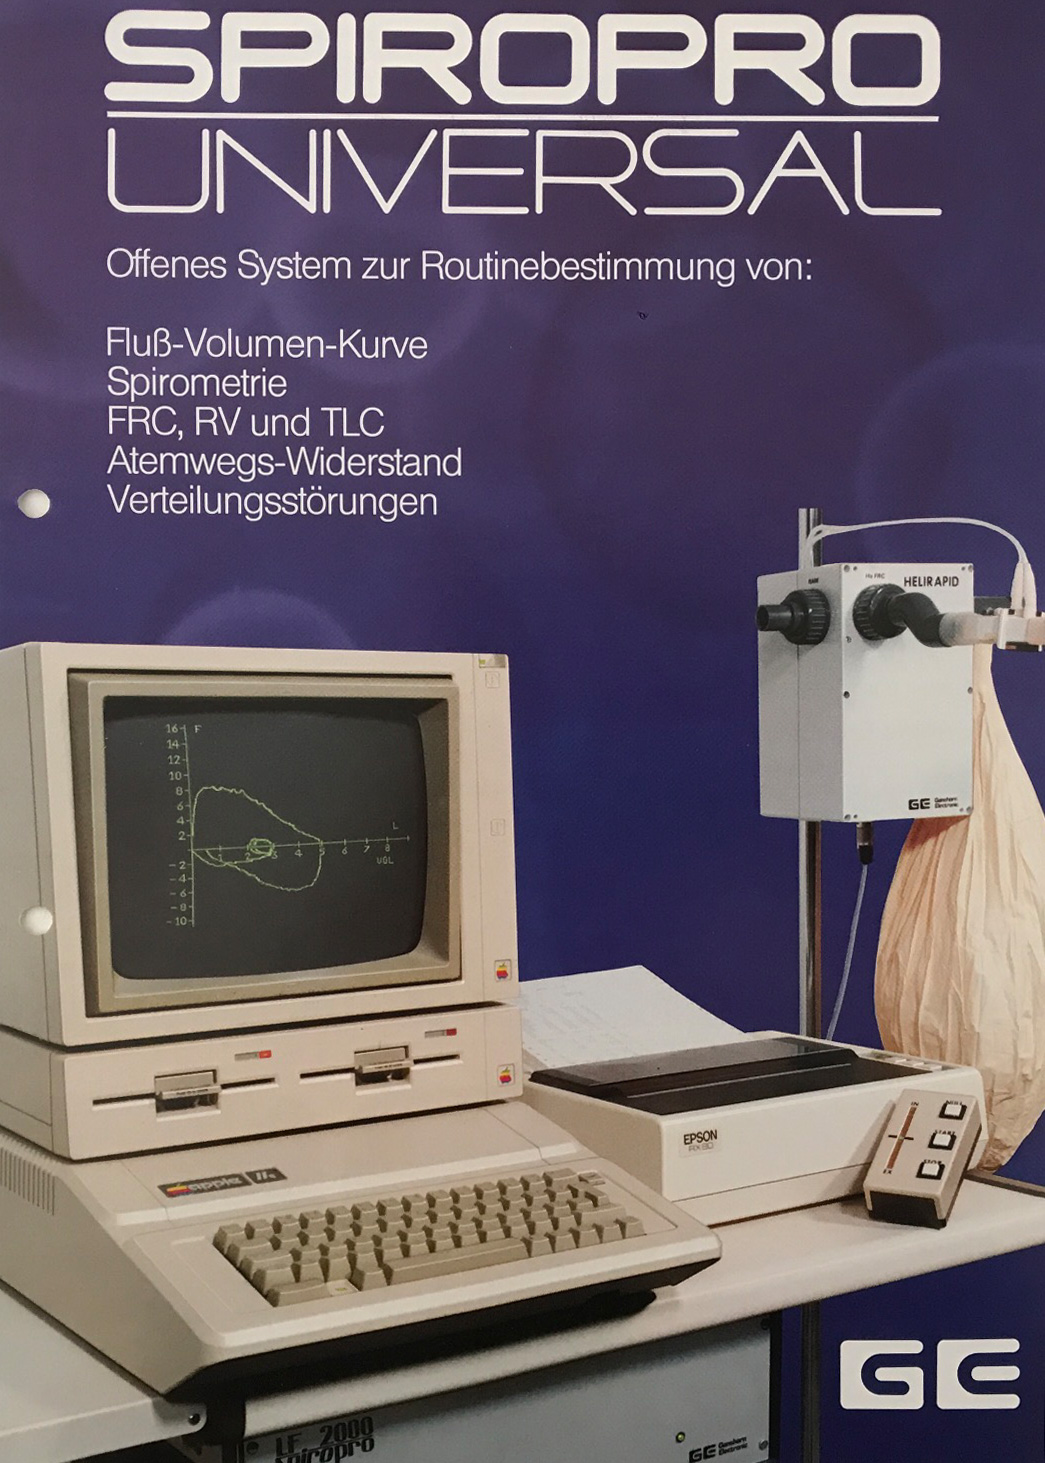 Ad of the spirometer system